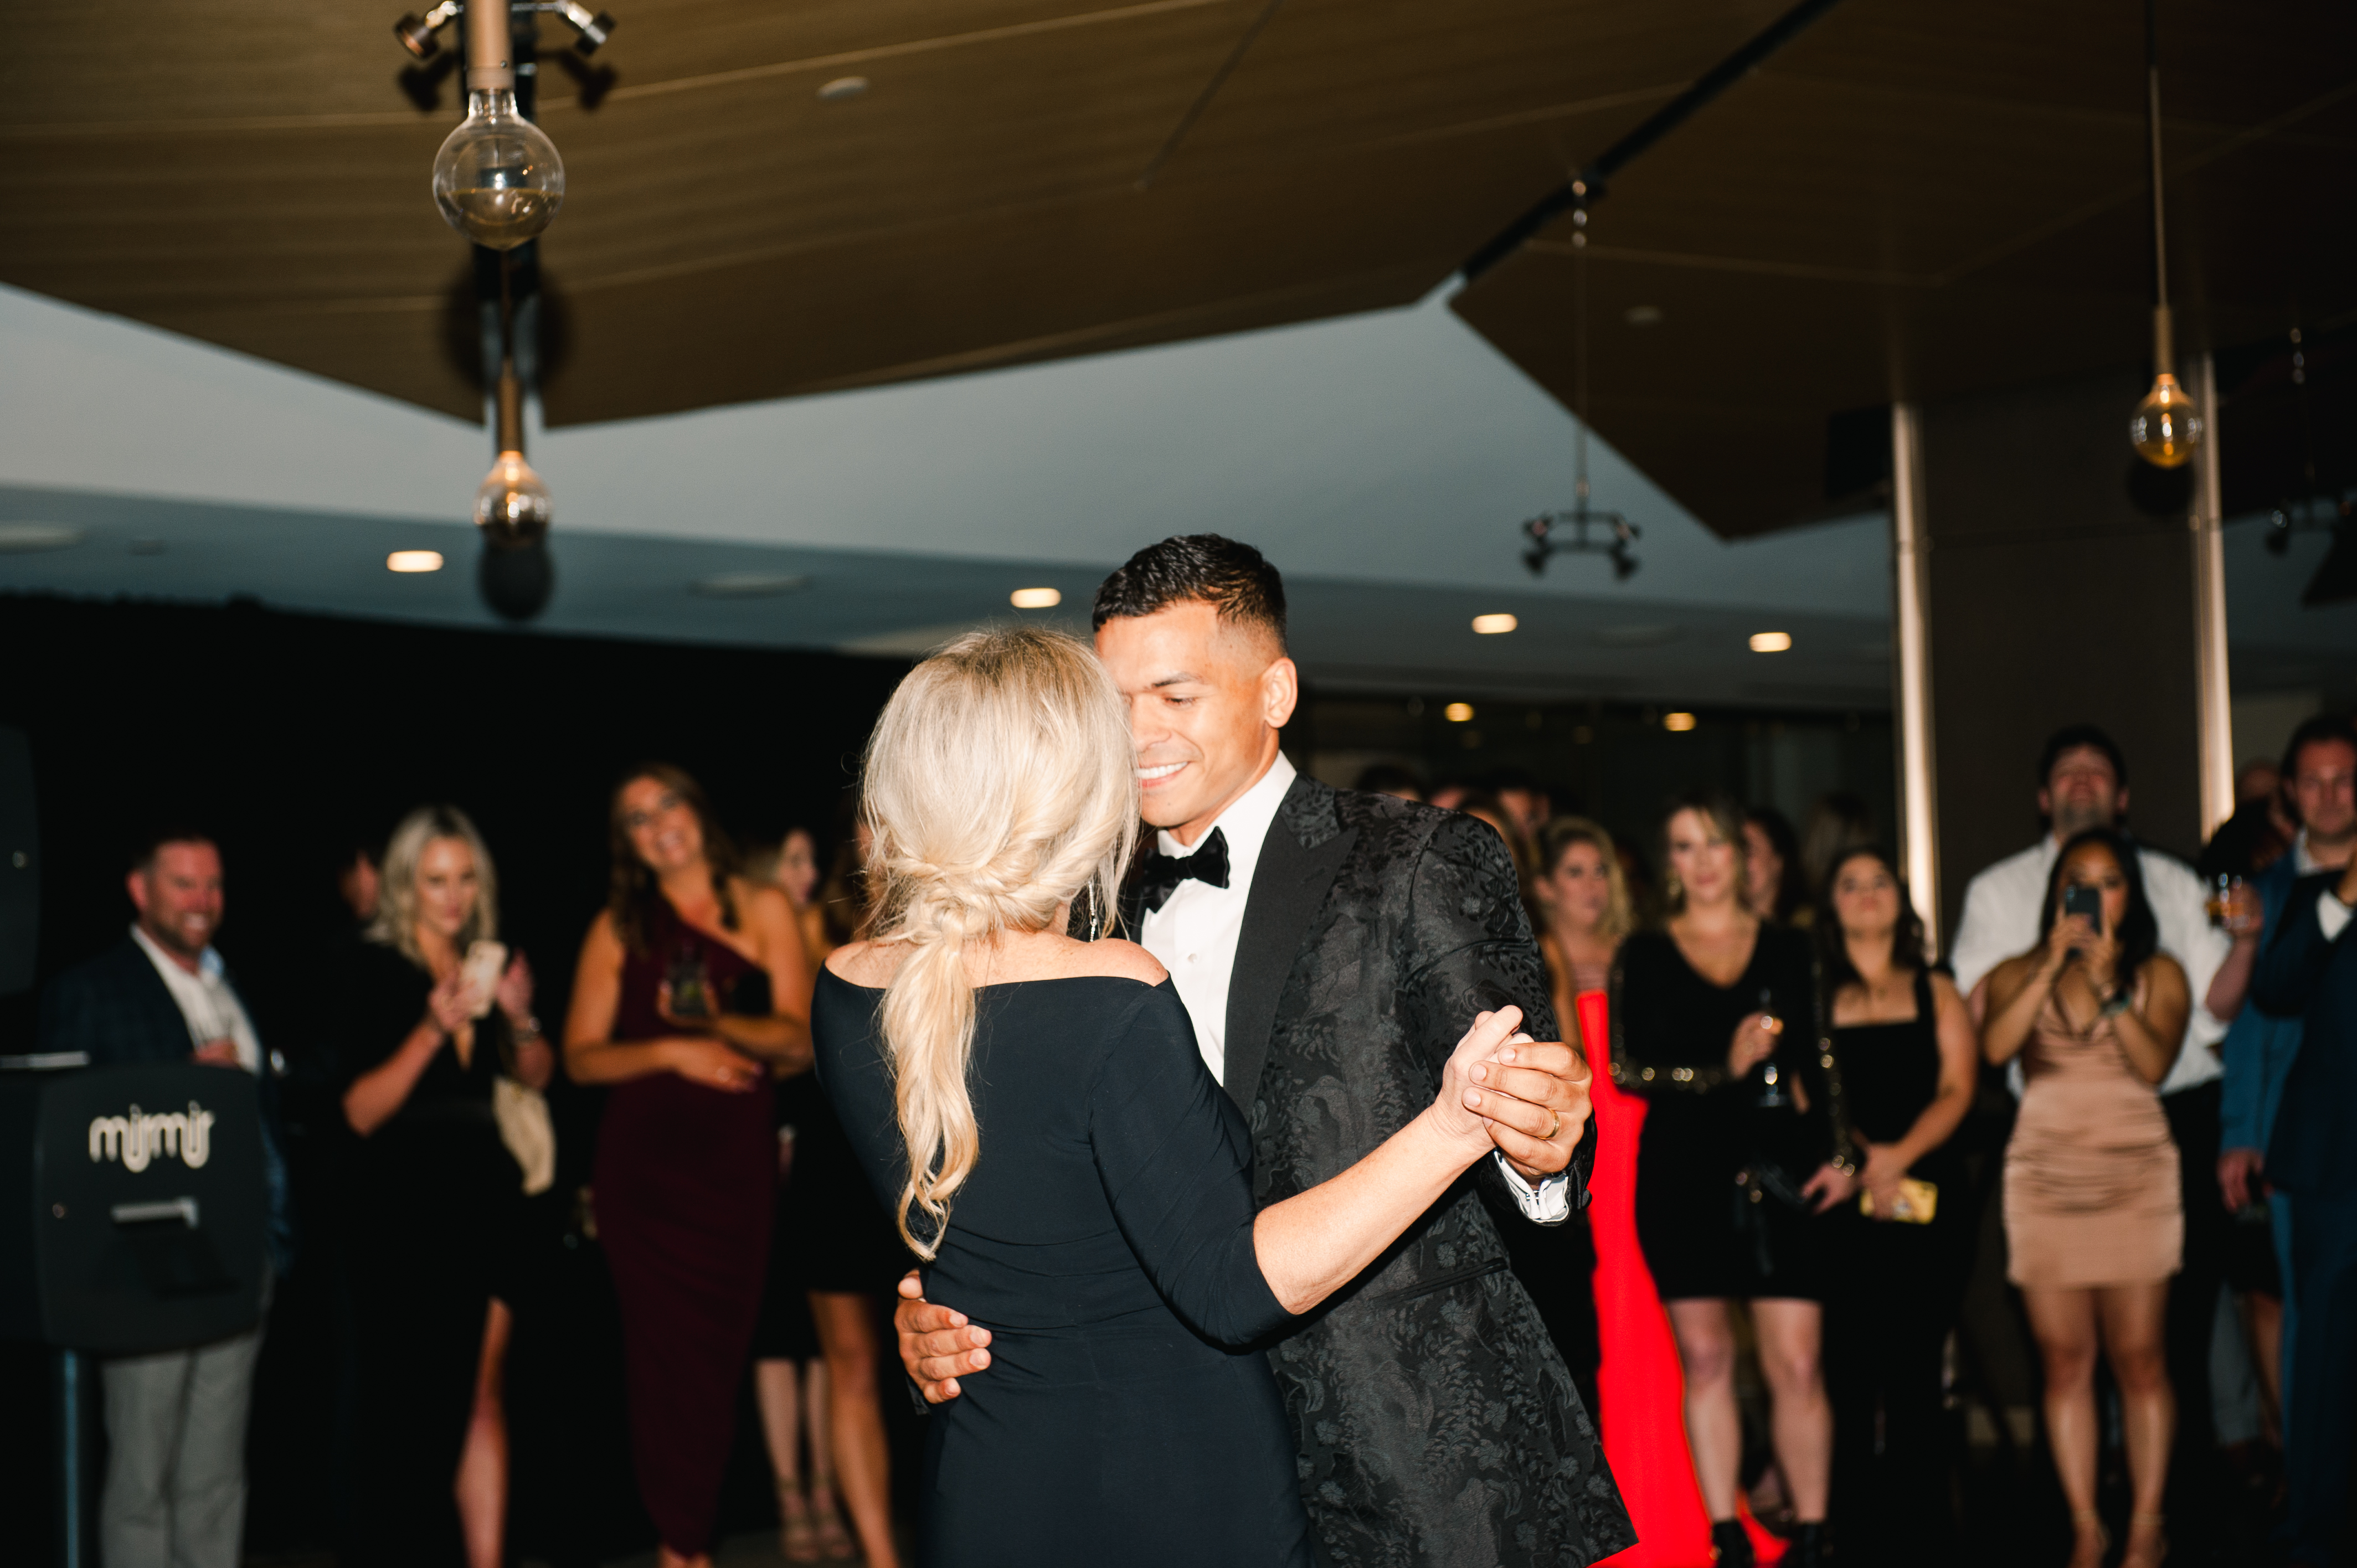 San Francisco blogger, Ashley Zeal from Two Peas in a Prada shares her wedding playlist. Including first dances, cocktail hour and dancing!